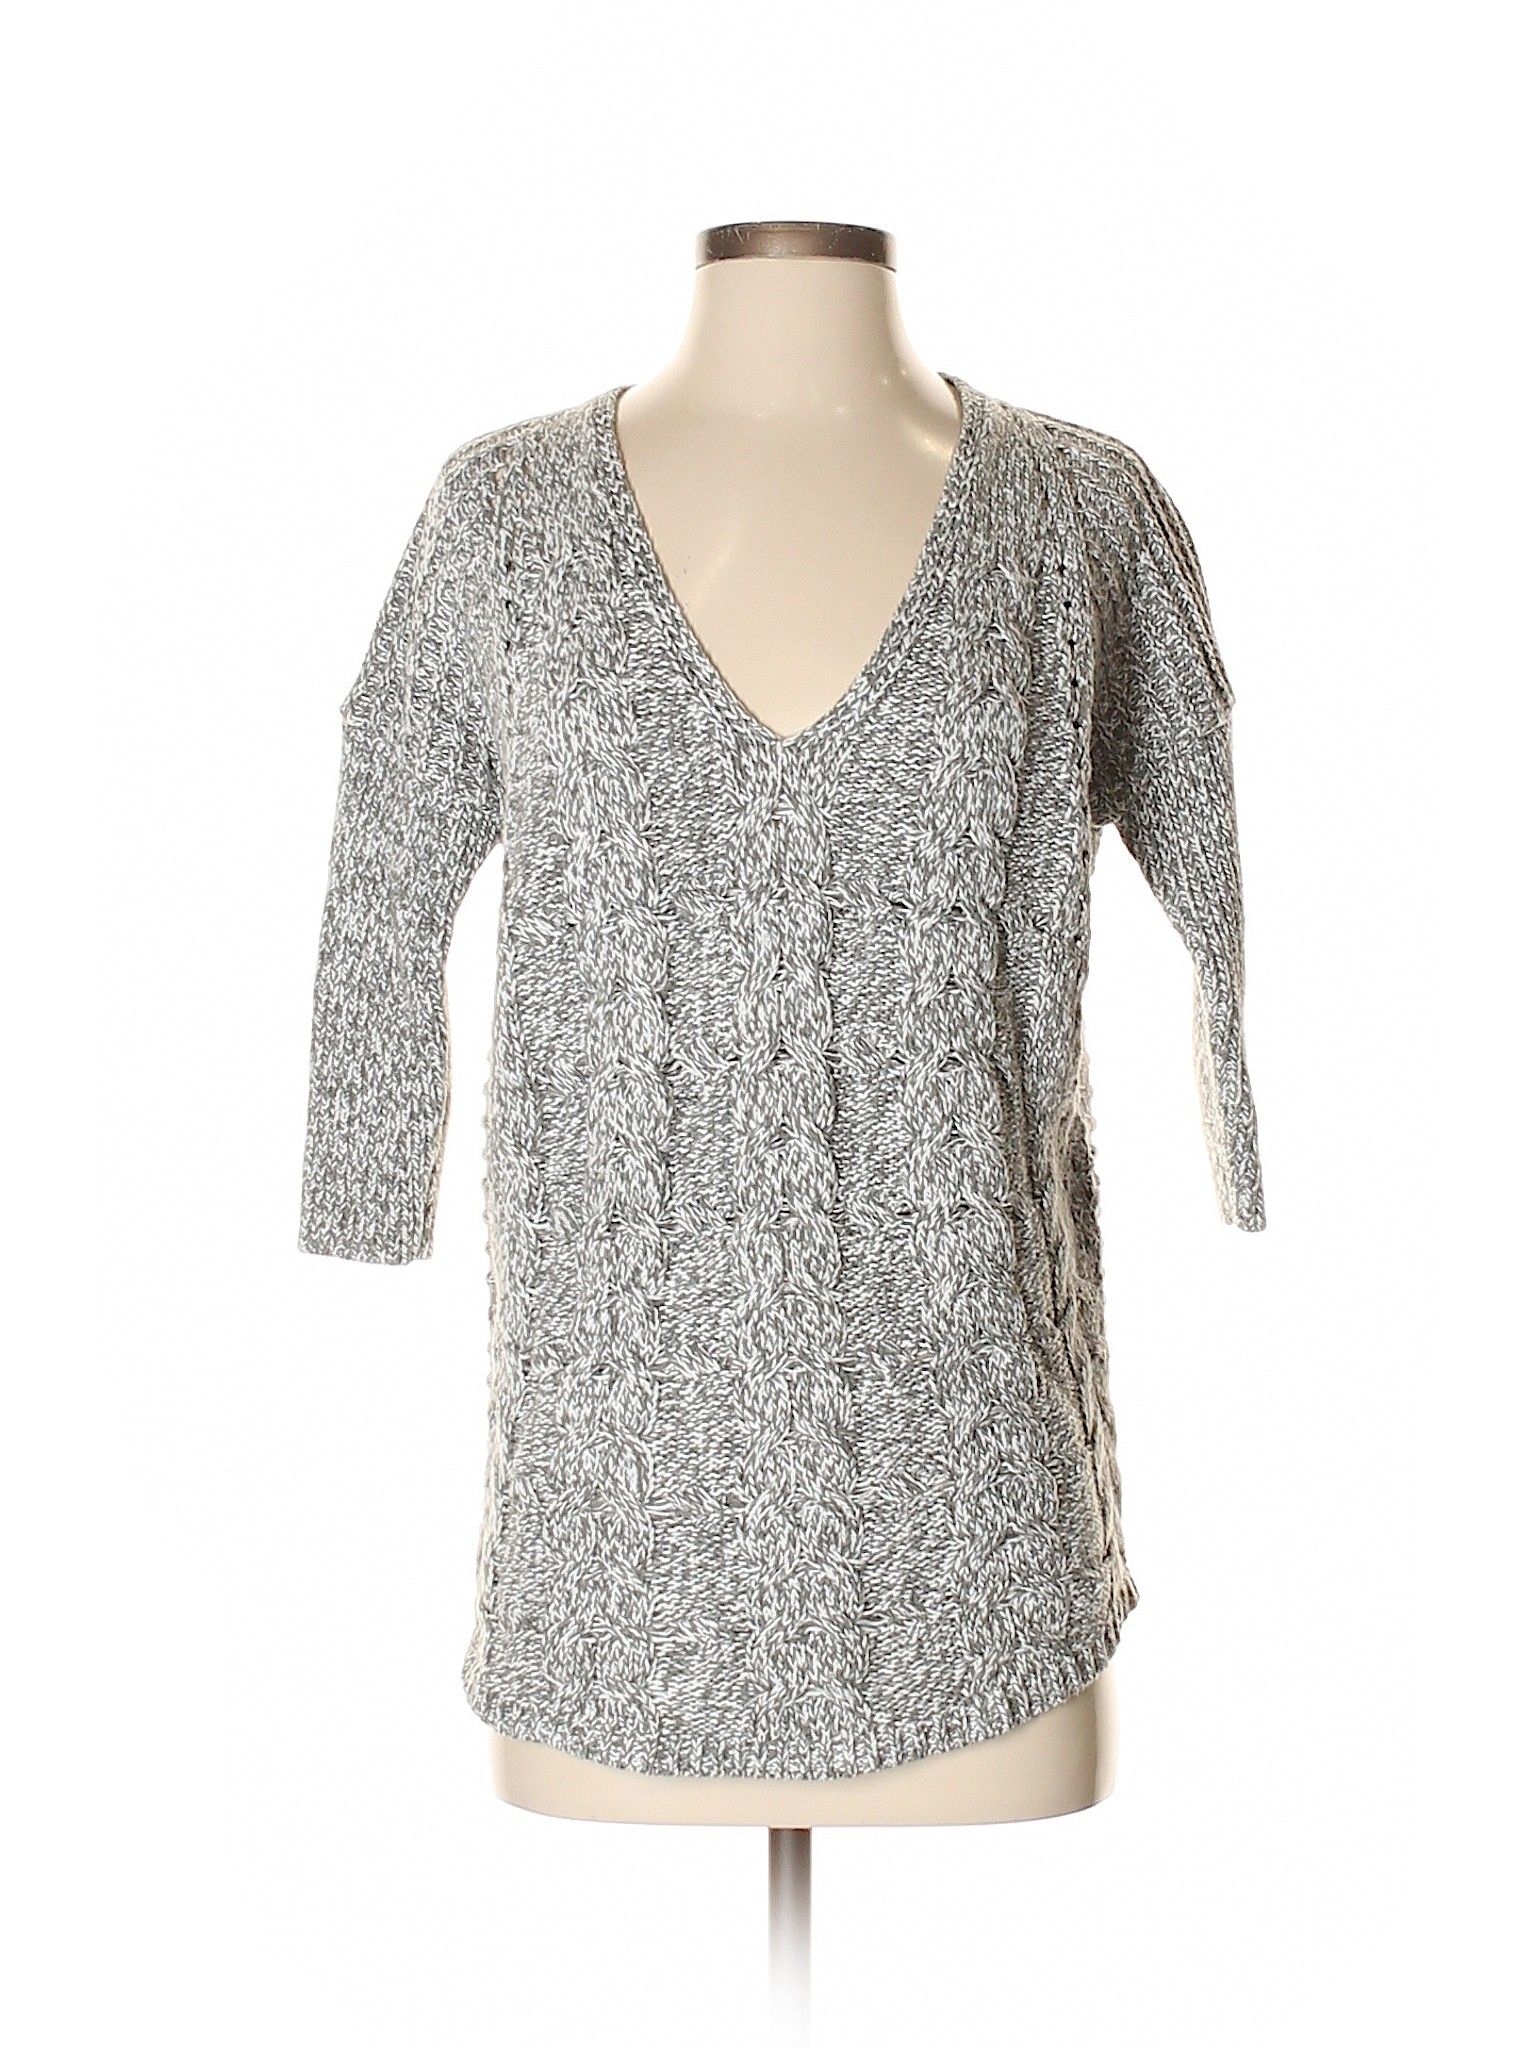 Express Outlet Pullover Sweater Size 0: Gray Women's Tops - 44970212 | thredUP